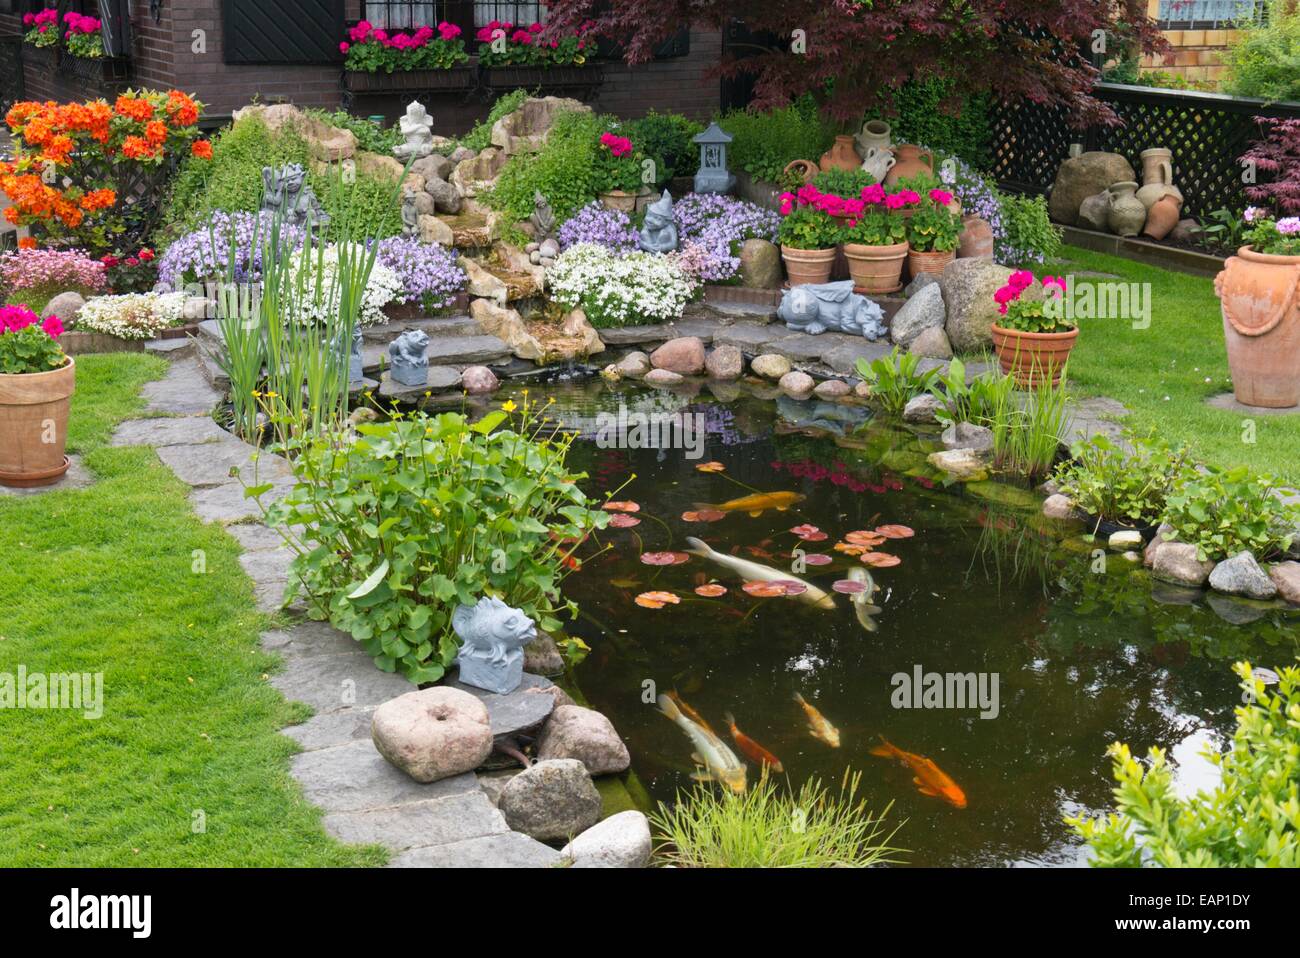 Koi pond with rhododendrons (Rhododendron), garden phlox (Phlox paniculata) and pelargoniums (Pelargonium) Stock Photo